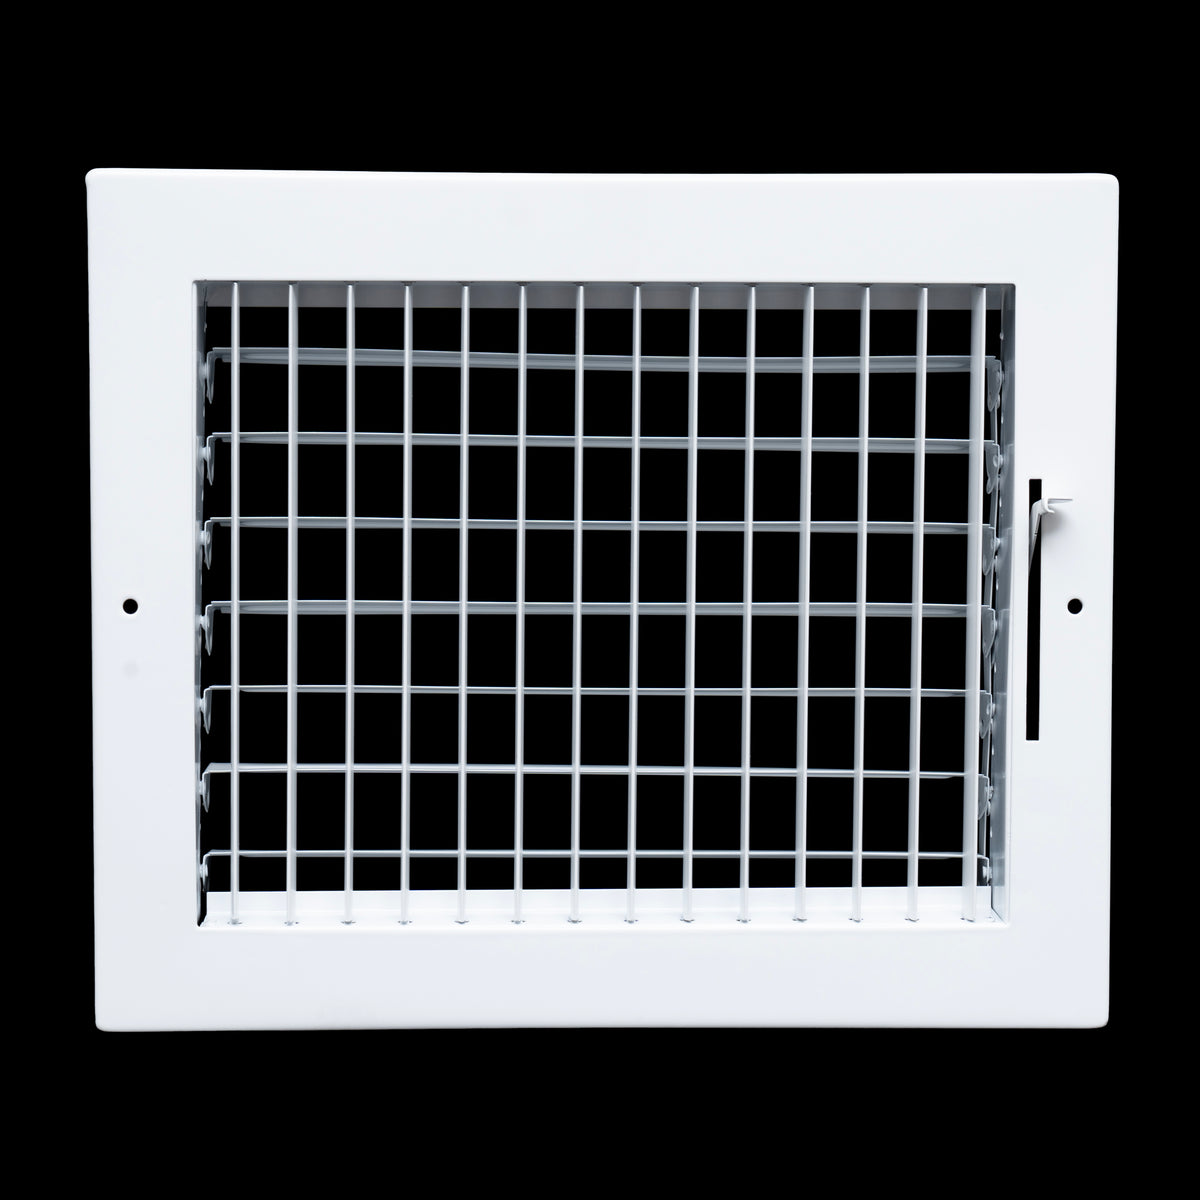 airgrilles 10"w x 8"h steel adjustable air supply grille - register vent cover grill for sidewall and ceiling - white - outer dimensions: 11.75"w x 9.75"h for 10x8 duct opening hnd-adj-wh-10x8-v1